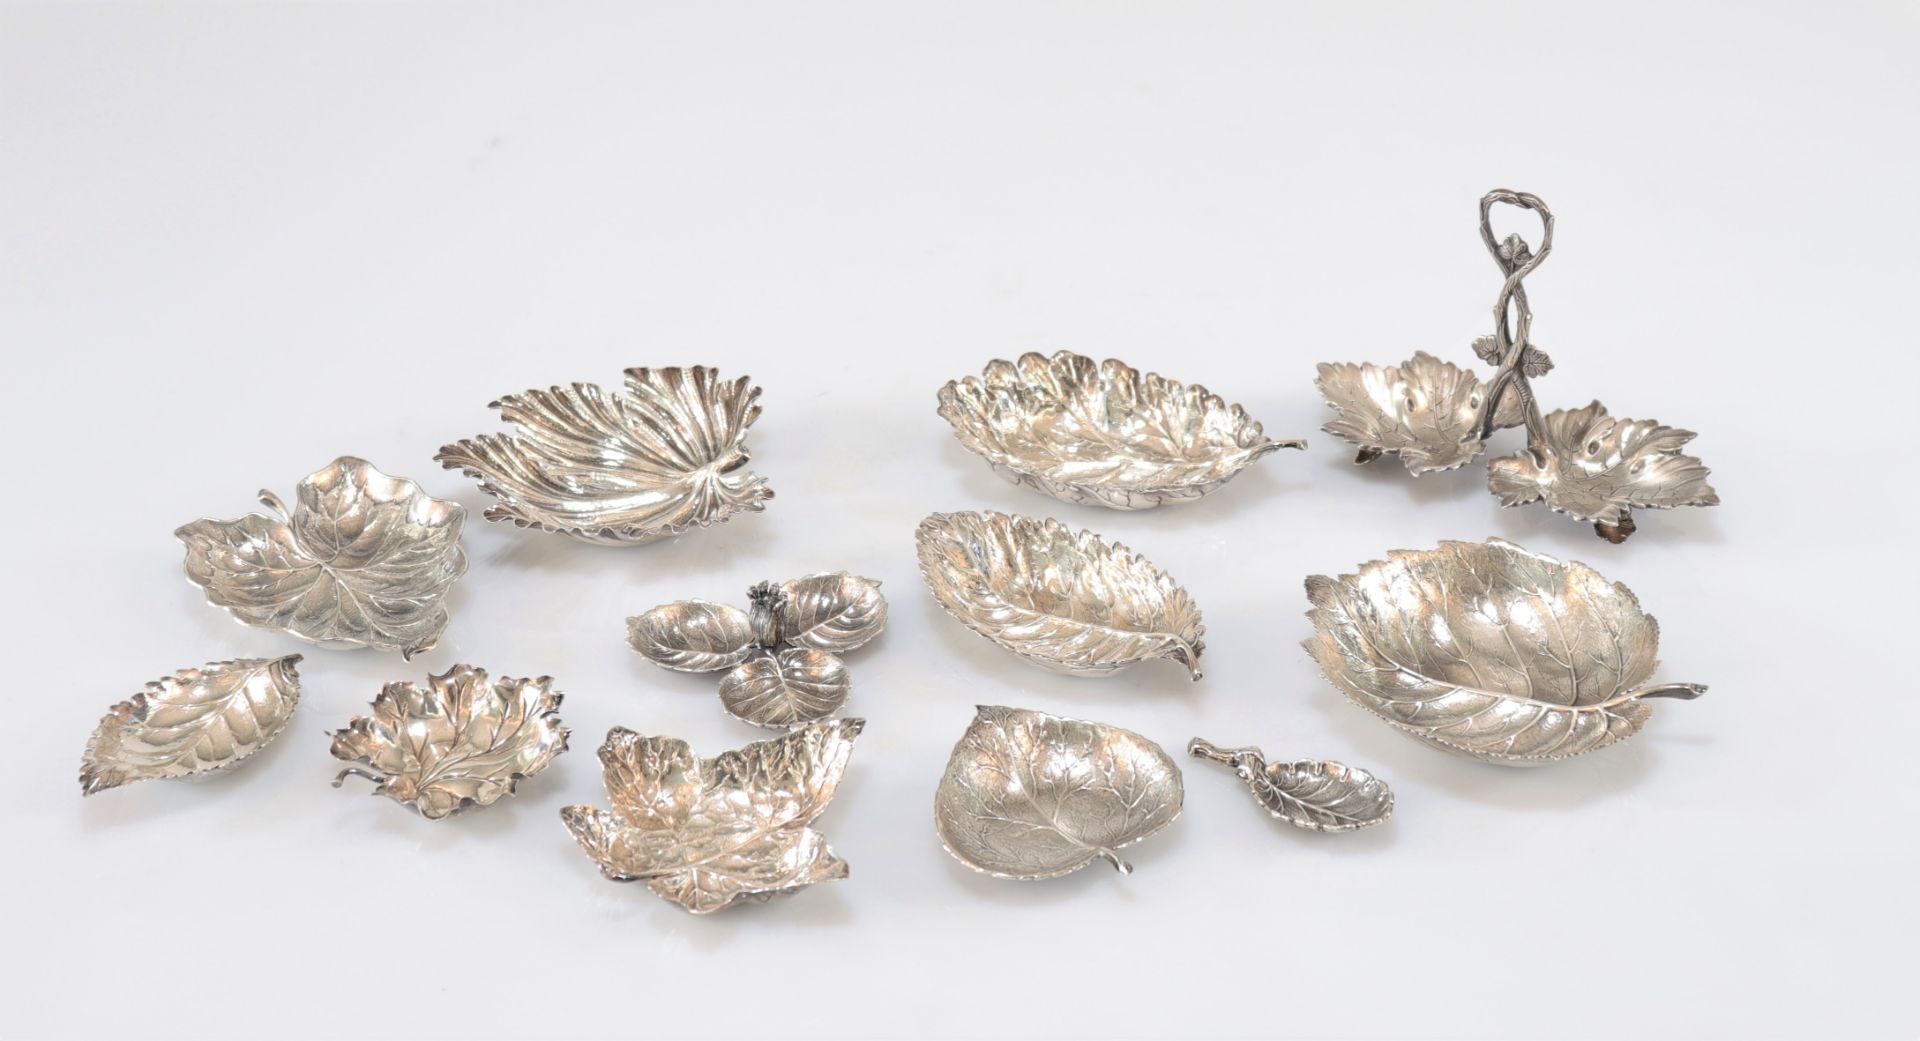 BUCCELLATI set (12pc) of solid 925 silver table decorations